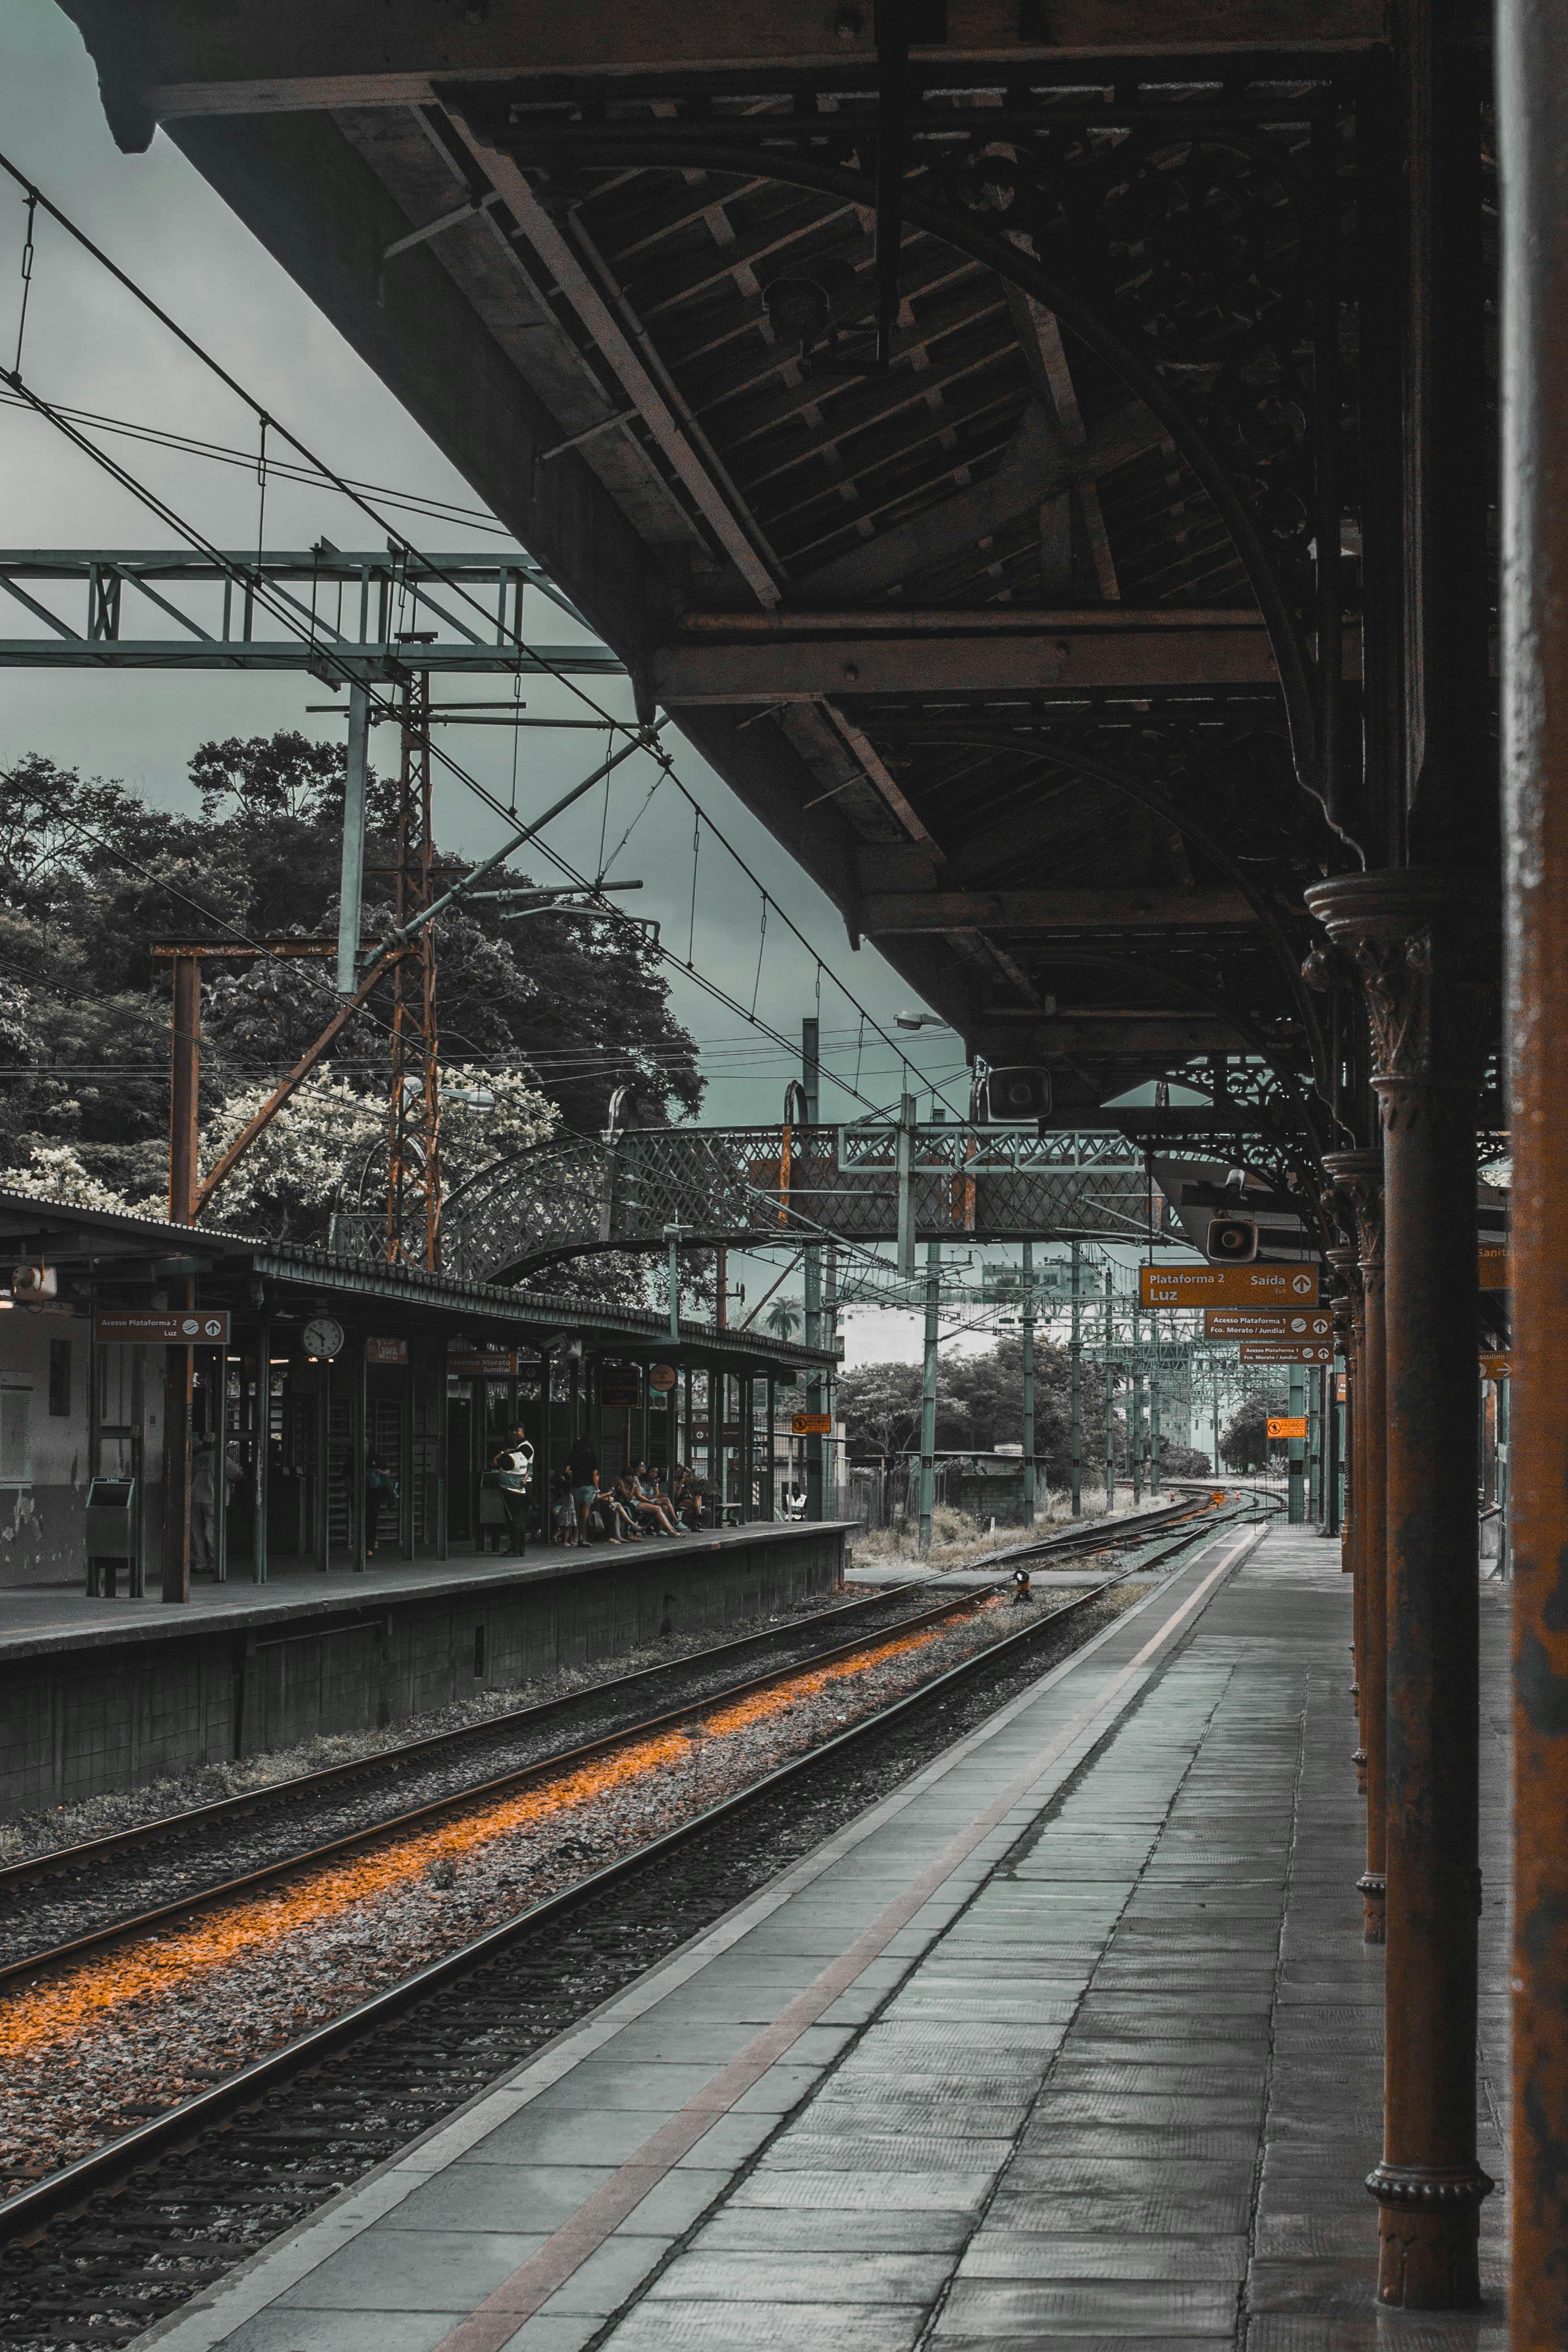 350 Railway Station Pictures HQ  Download Free Images on Unsplash